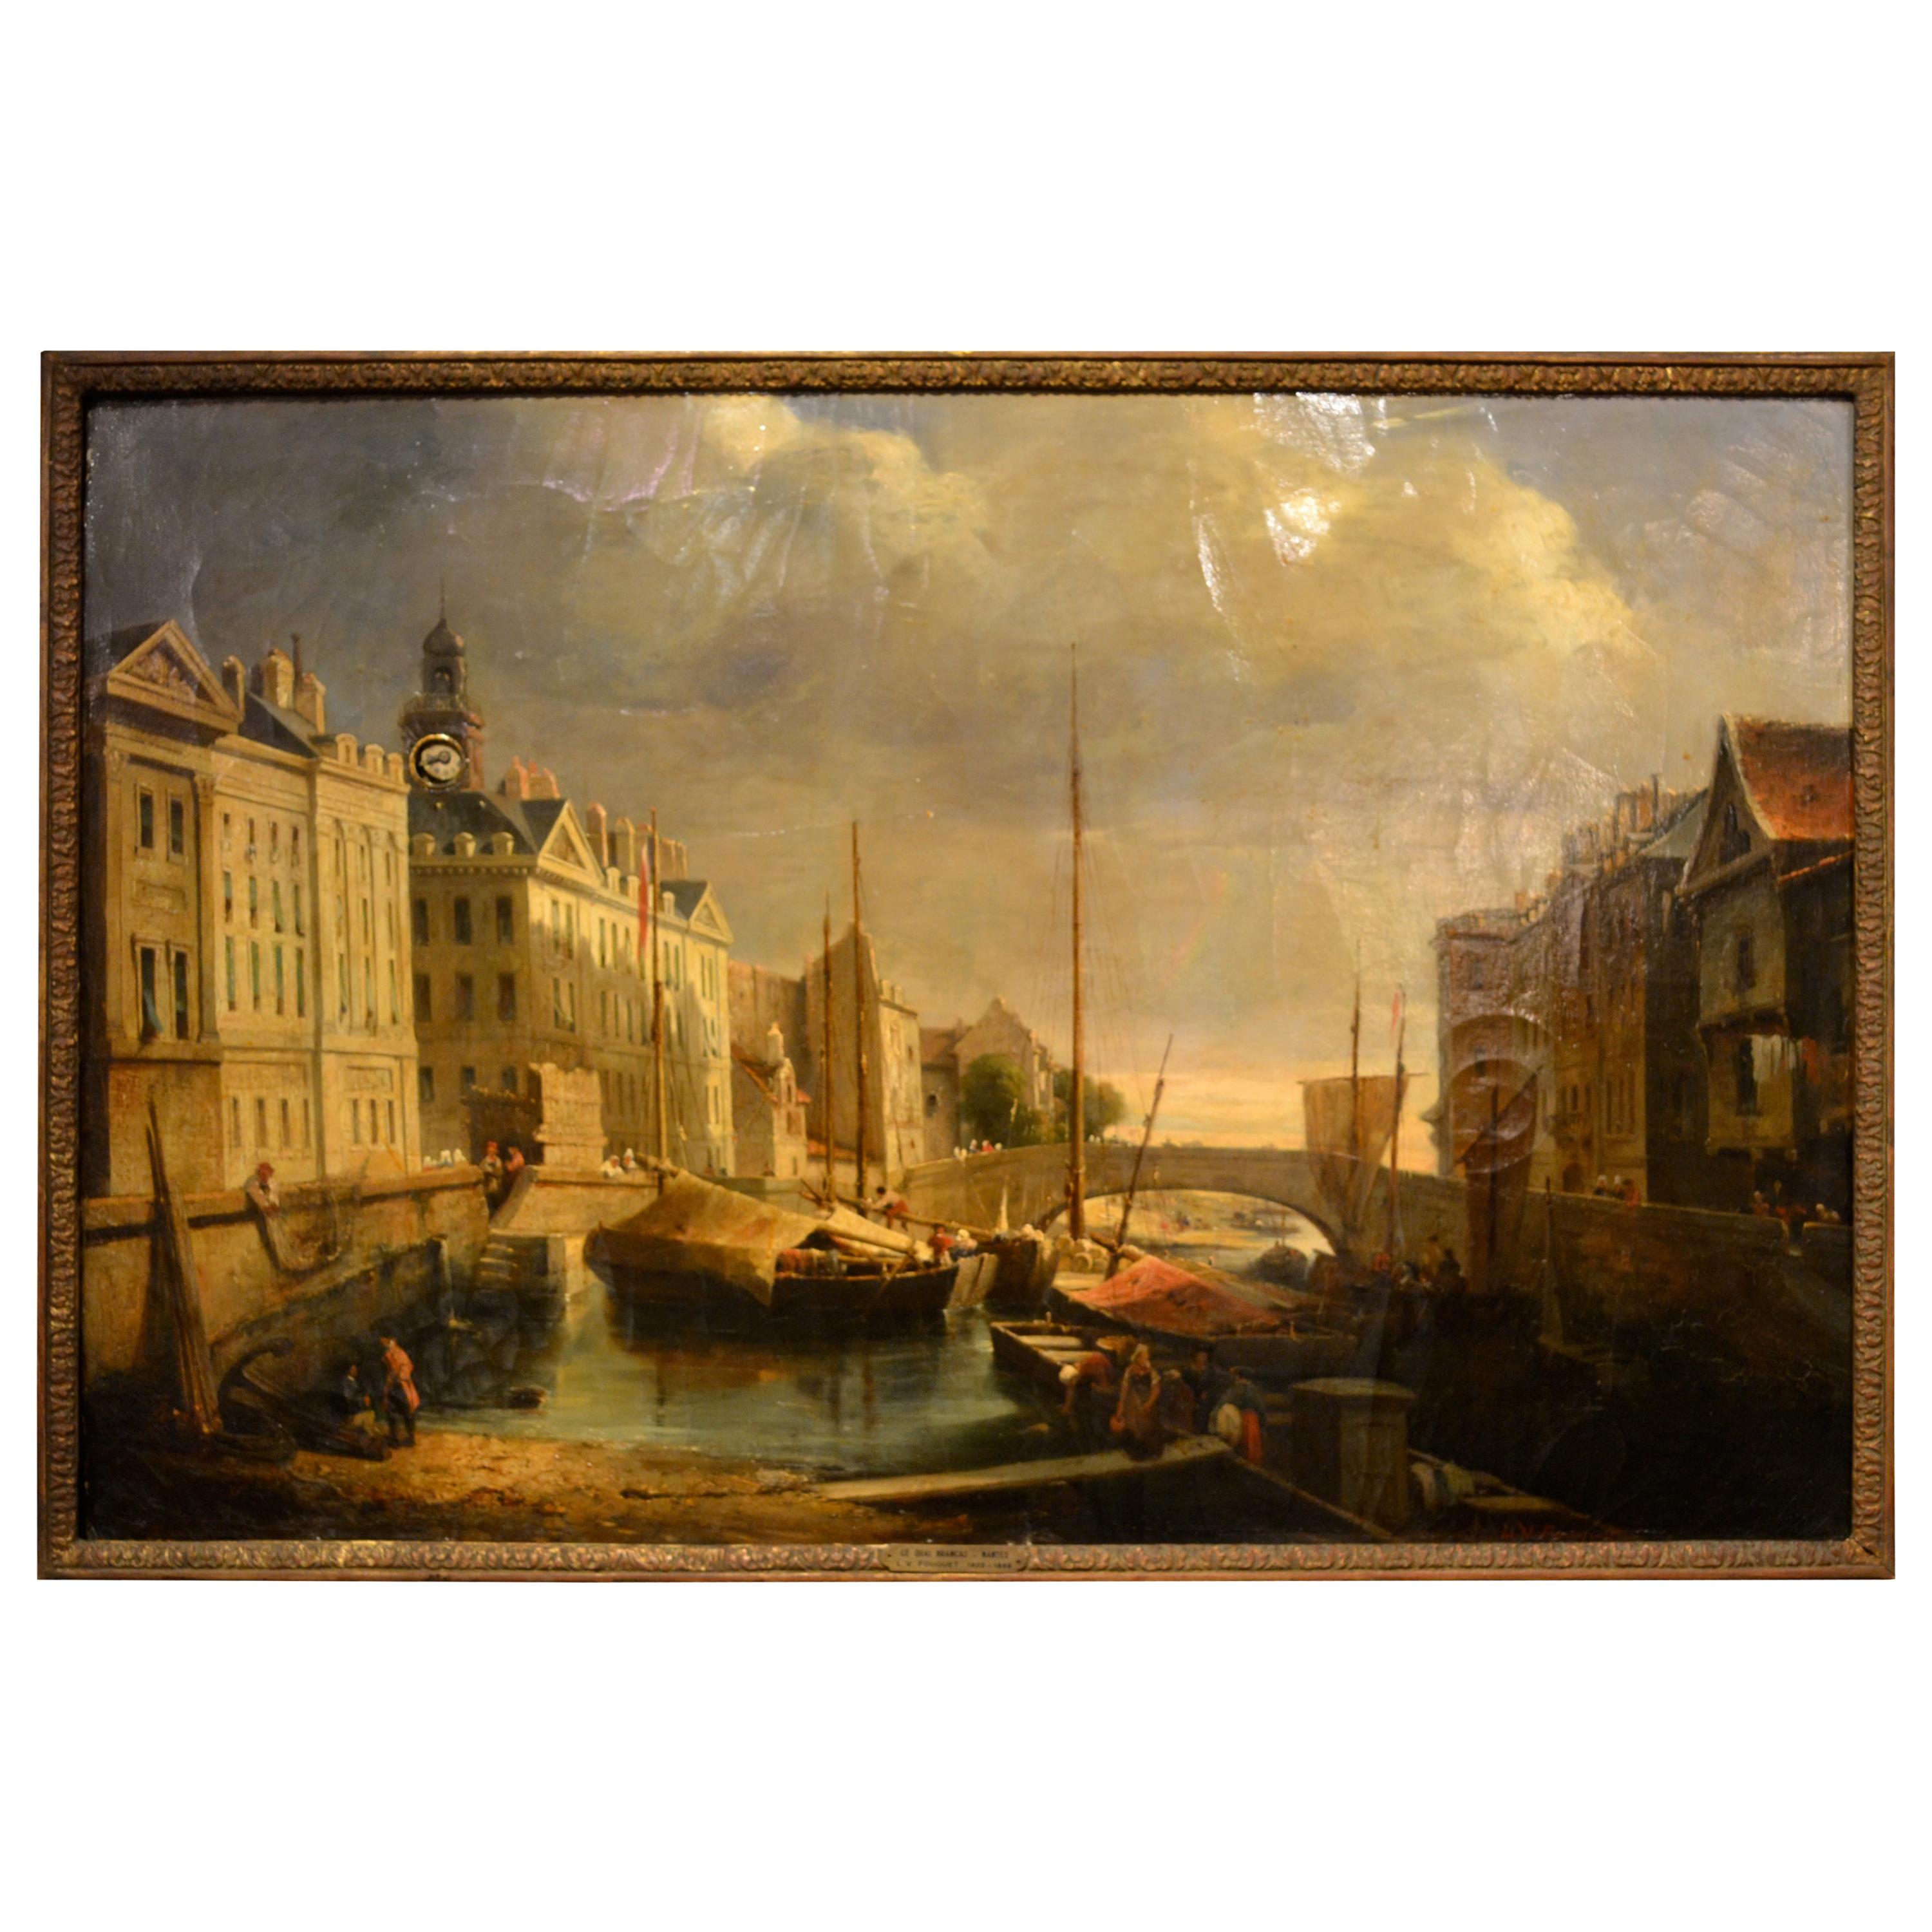 A rare complicated music clock behind a fine oil on canvas painting of the Quai De Brancas In Nantes, France. The painting of the Quai at Brancas on the River Loire at Nantes was executed by a relatively obscure but obviously talented French artist